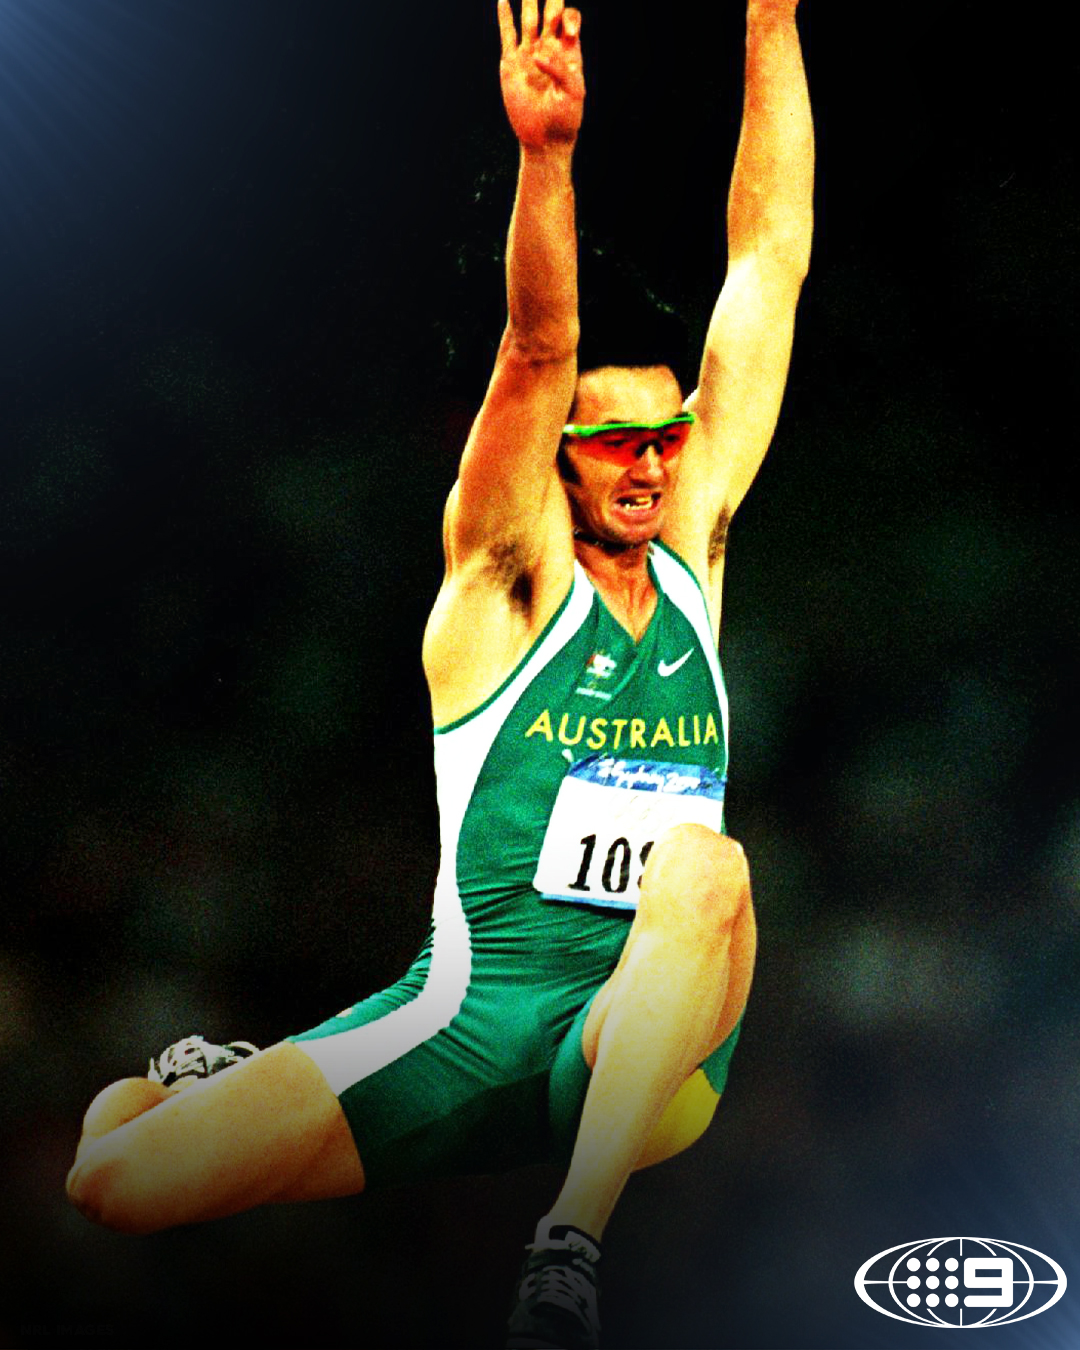 Wishing a very happy birthday to the 2000 long jump silver medallist - Jumping Jai Taurima!      